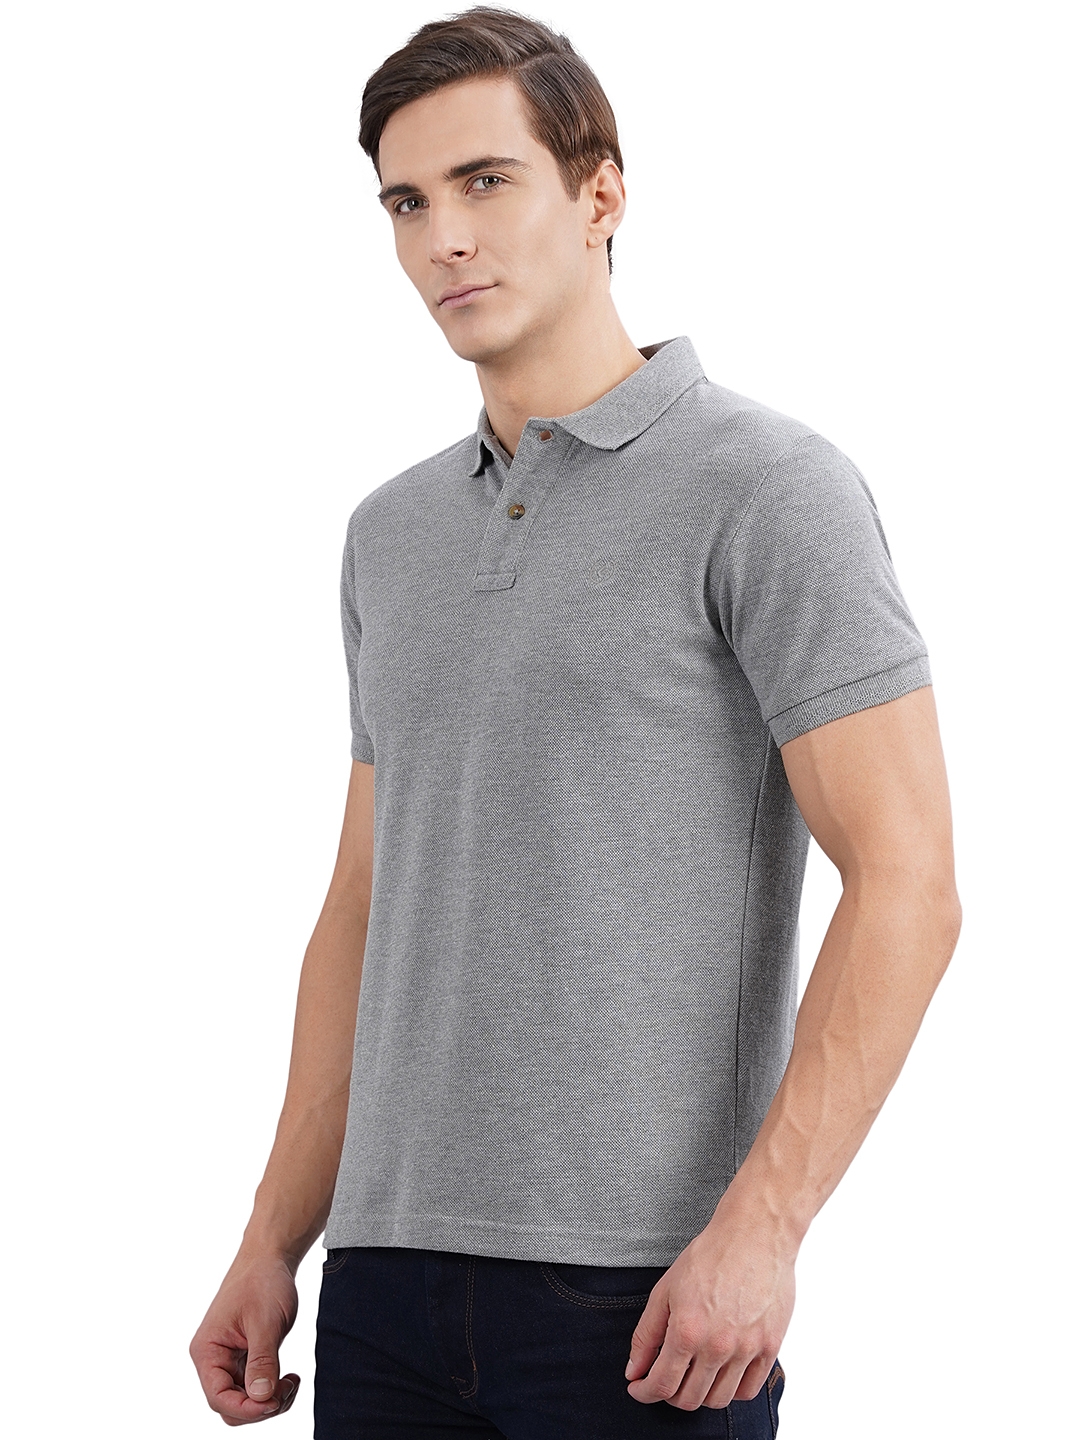 Greenfibre | Grey Solid Slim Fit Polo T-Shirt | Greenfibre 1